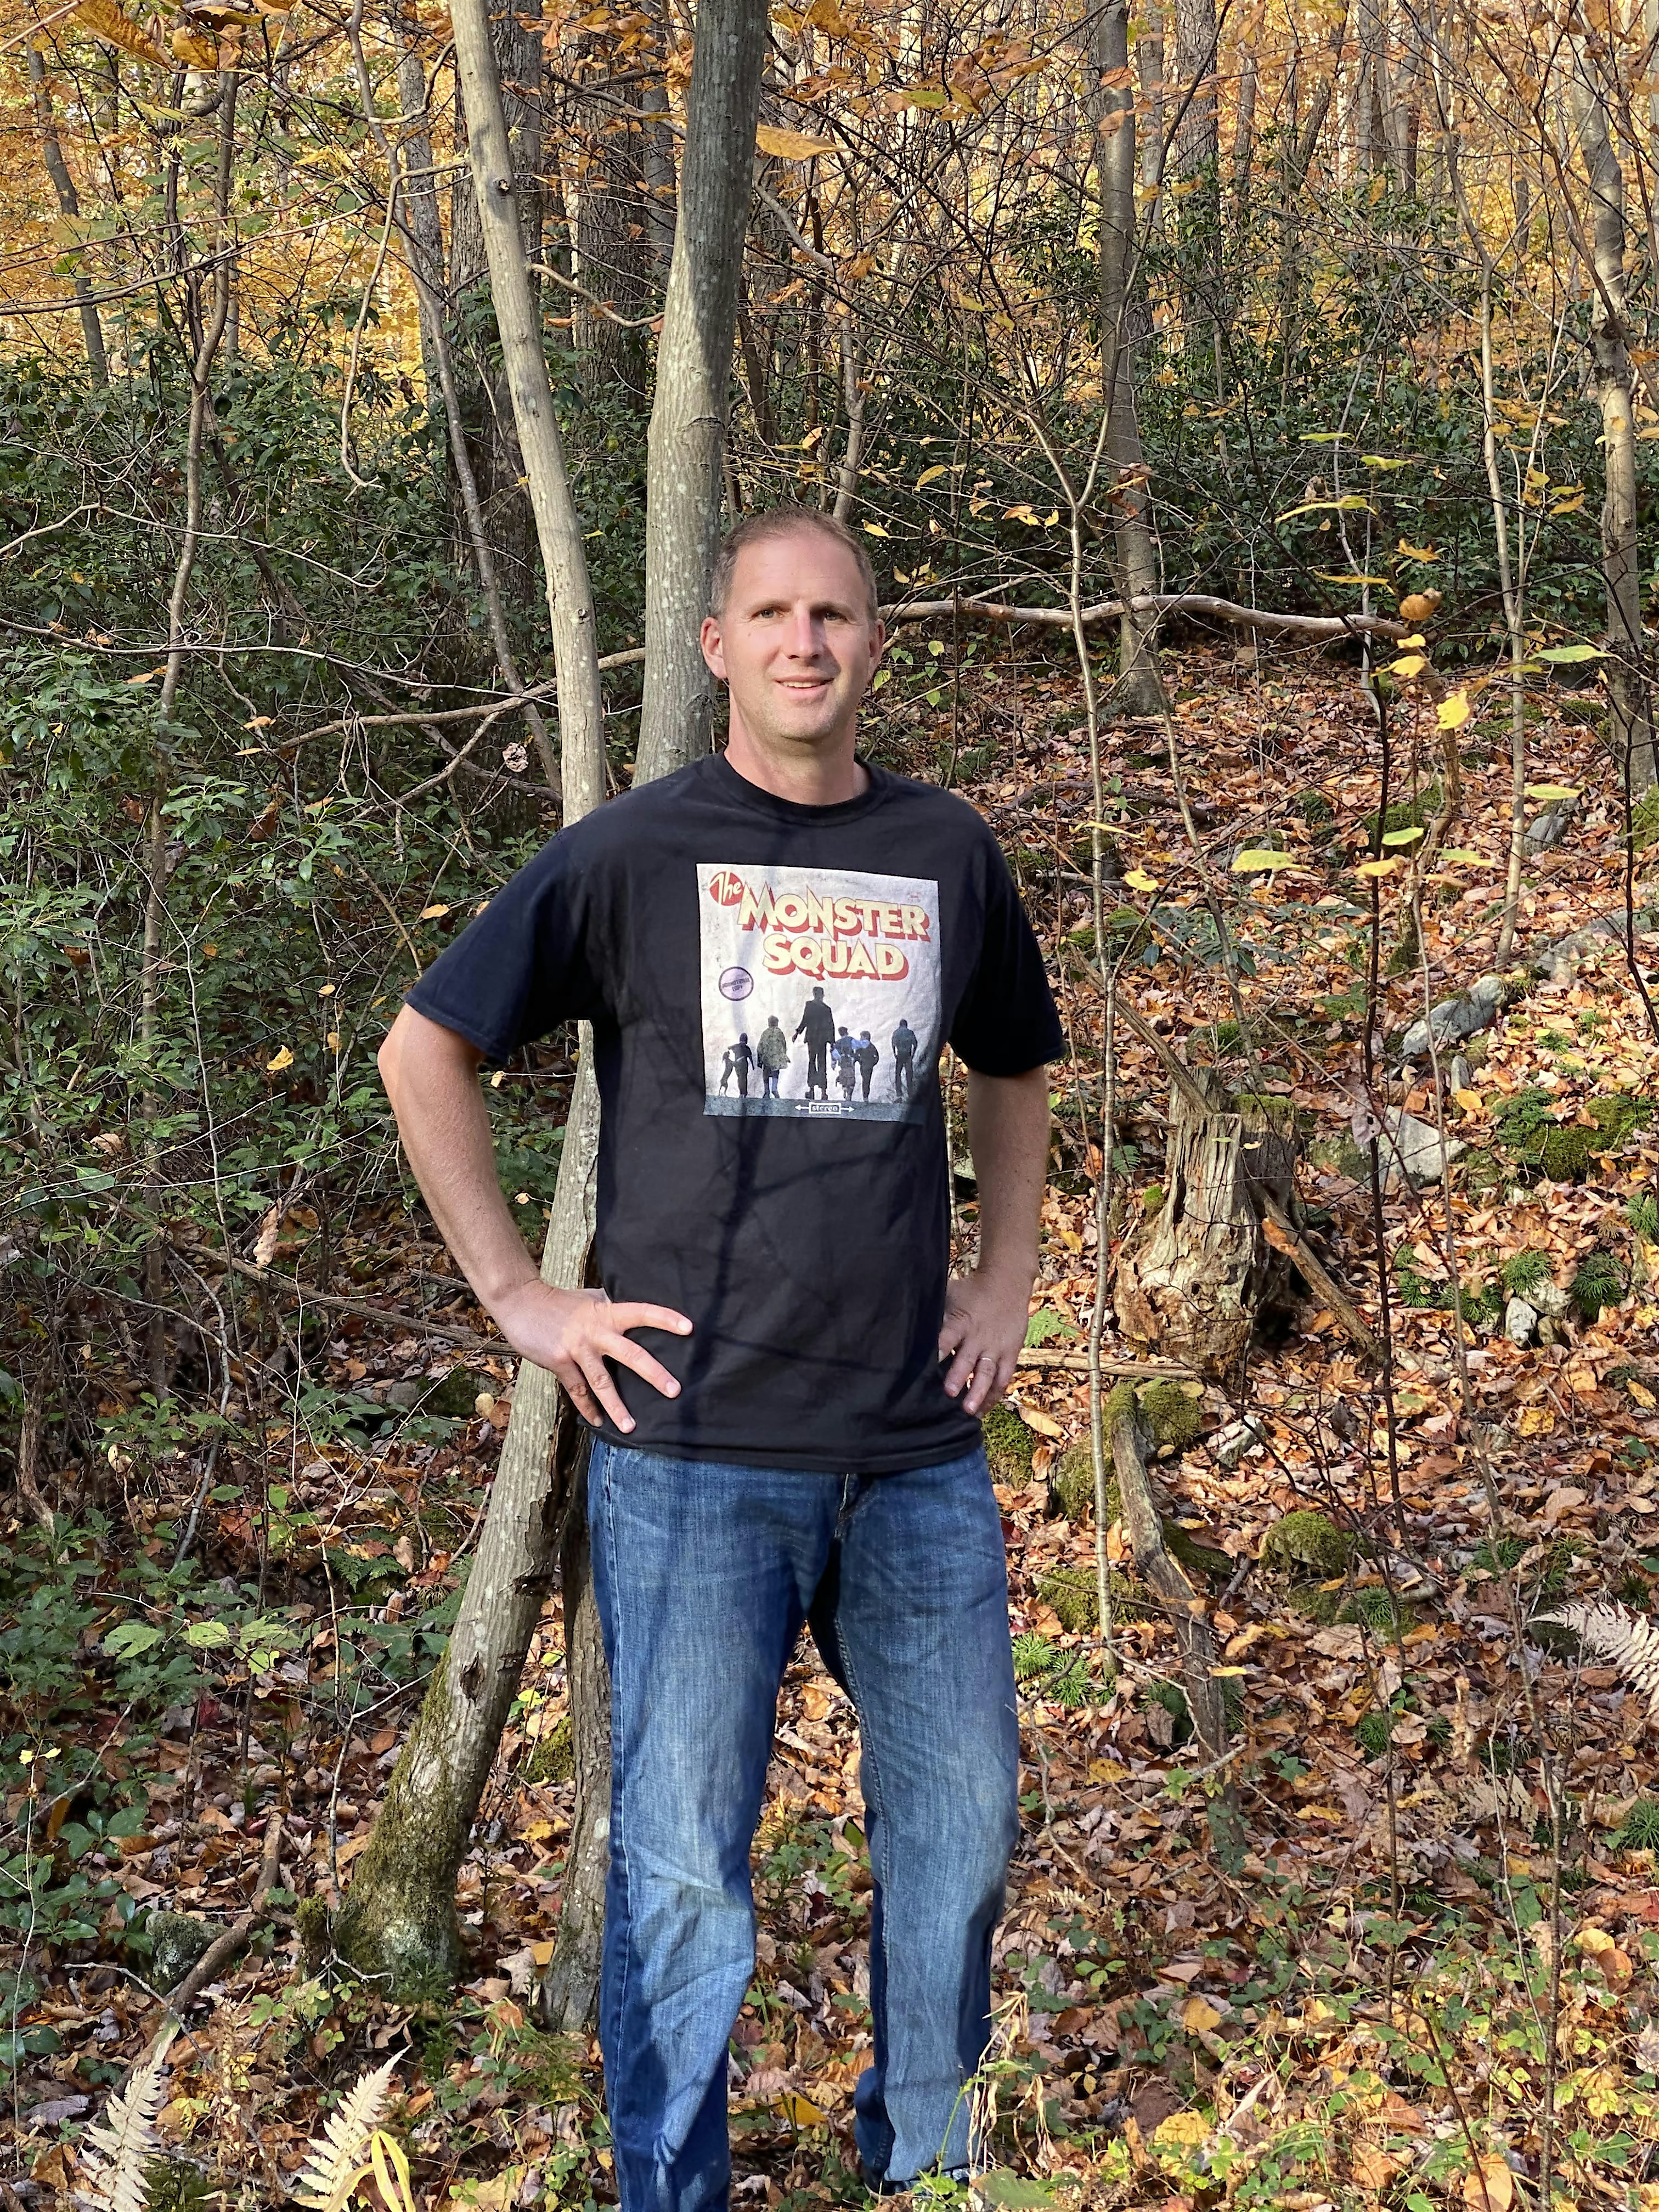 Kevin Stecko, founder of 80sTees.com, wearing the Soundtrack Monster Squad T-Shirt in a forest setting